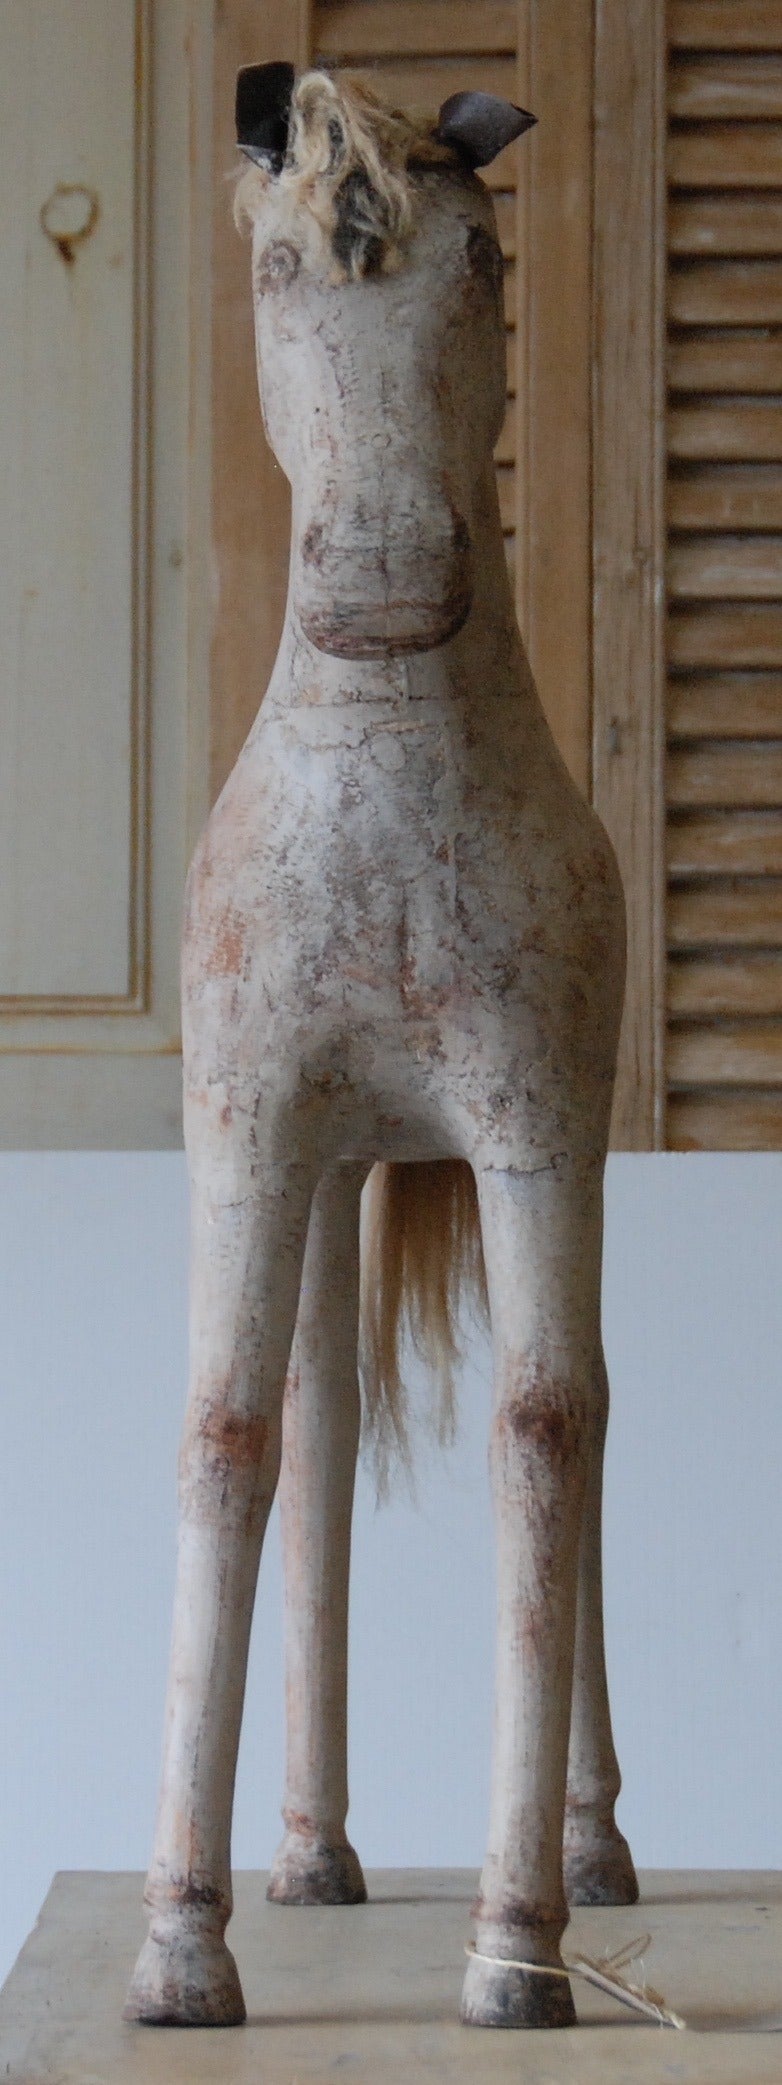 19th century Swedish toy horse stripped to the original finish. Lovely aged patina.